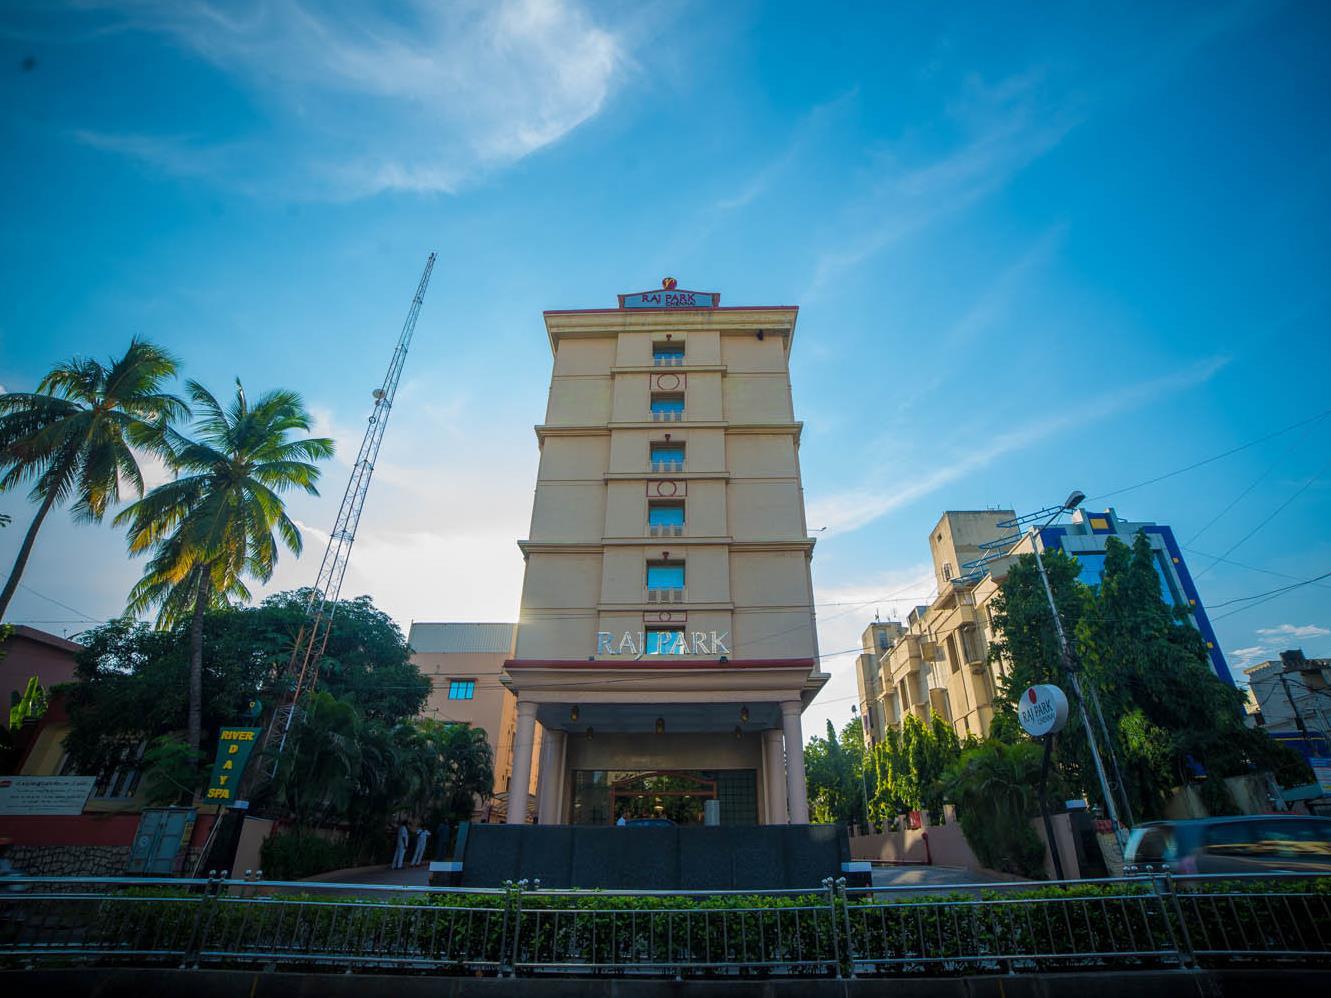 Raj Park Hotel Chennai FAQ 2016, What facilities are there in Raj Park Hotel Chennai 2016, What Languages Spoken are Supported in Raj Park Hotel Chennai 2016, Which payment cards are accepted in Raj Park Hotel Chennai , Chennai Raj Park Hotel room facilities and services Q&A 2016, Chennai Raj Park Hotel online booking services 2016, Chennai Raj Park Hotel address 2016, Chennai Raj Park Hotel telephone number 2016,Chennai Raj Park Hotel map 2016, Chennai Raj Park Hotel traffic guide 2016, how to go Chennai Raj Park Hotel, Chennai Raj Park Hotel booking online 2016, Chennai Raj Park Hotel room types 2016.